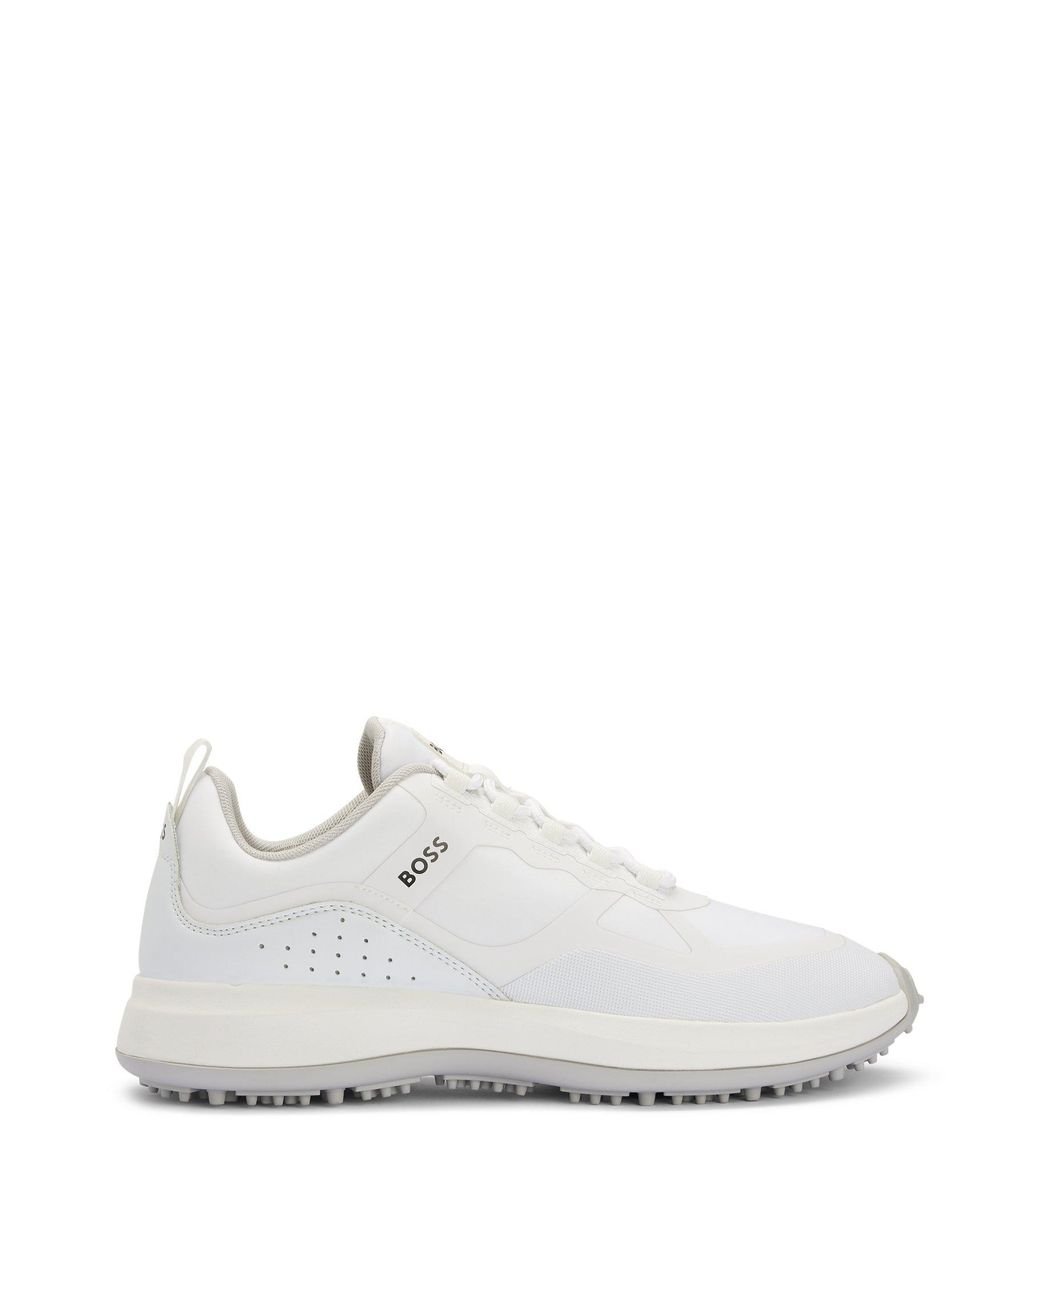 BOSS by HUGO BOSS Mixed-material Golf Shoes With Rubberised Sole in White  for Men | Lyst Australia